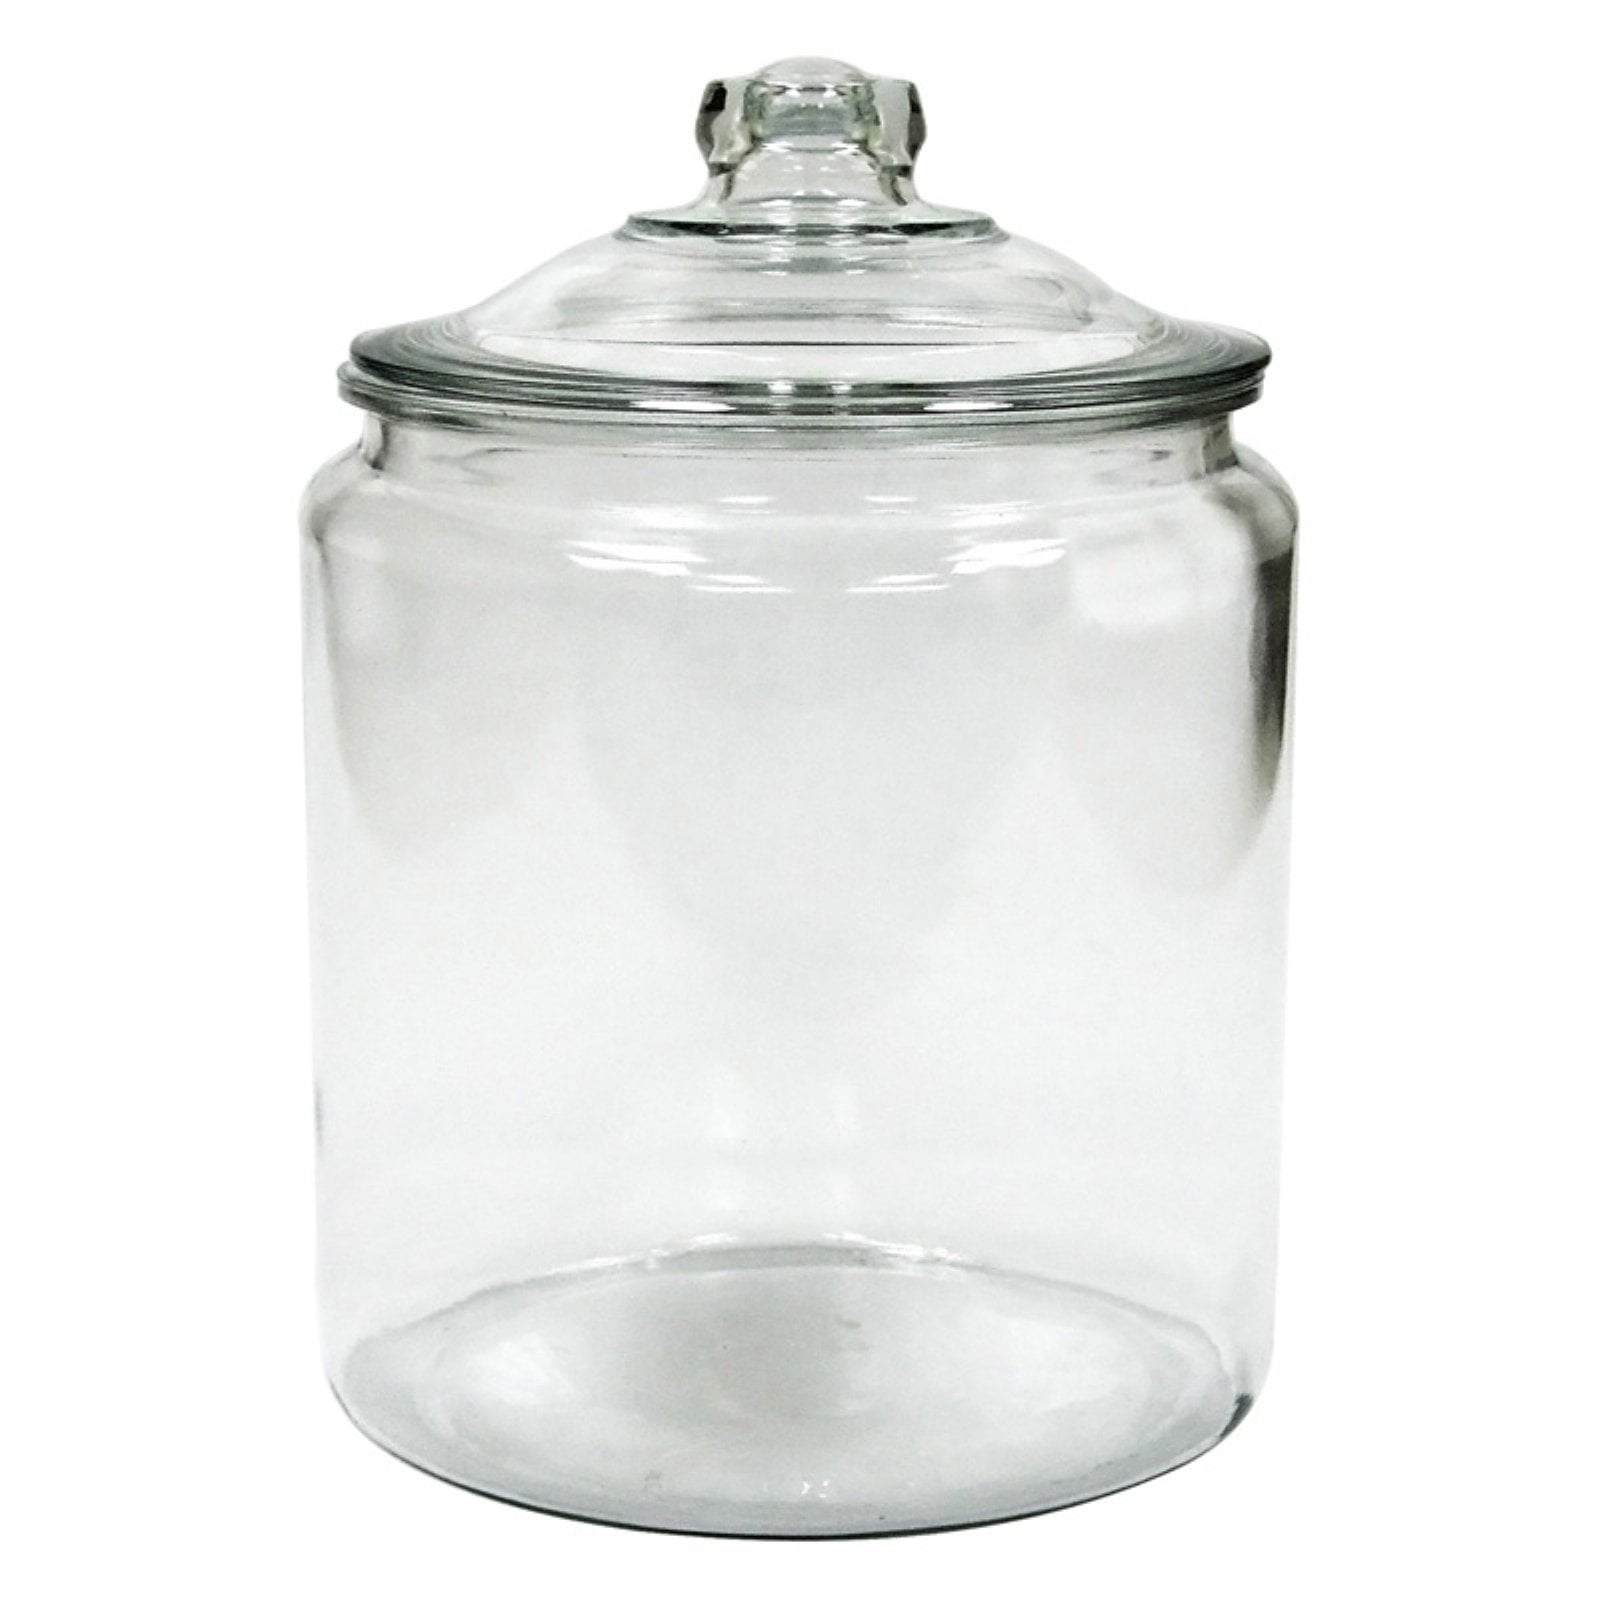 Anchor Hocking Heritage Hill Clear Glass Jar with Lid, 2 Gallon